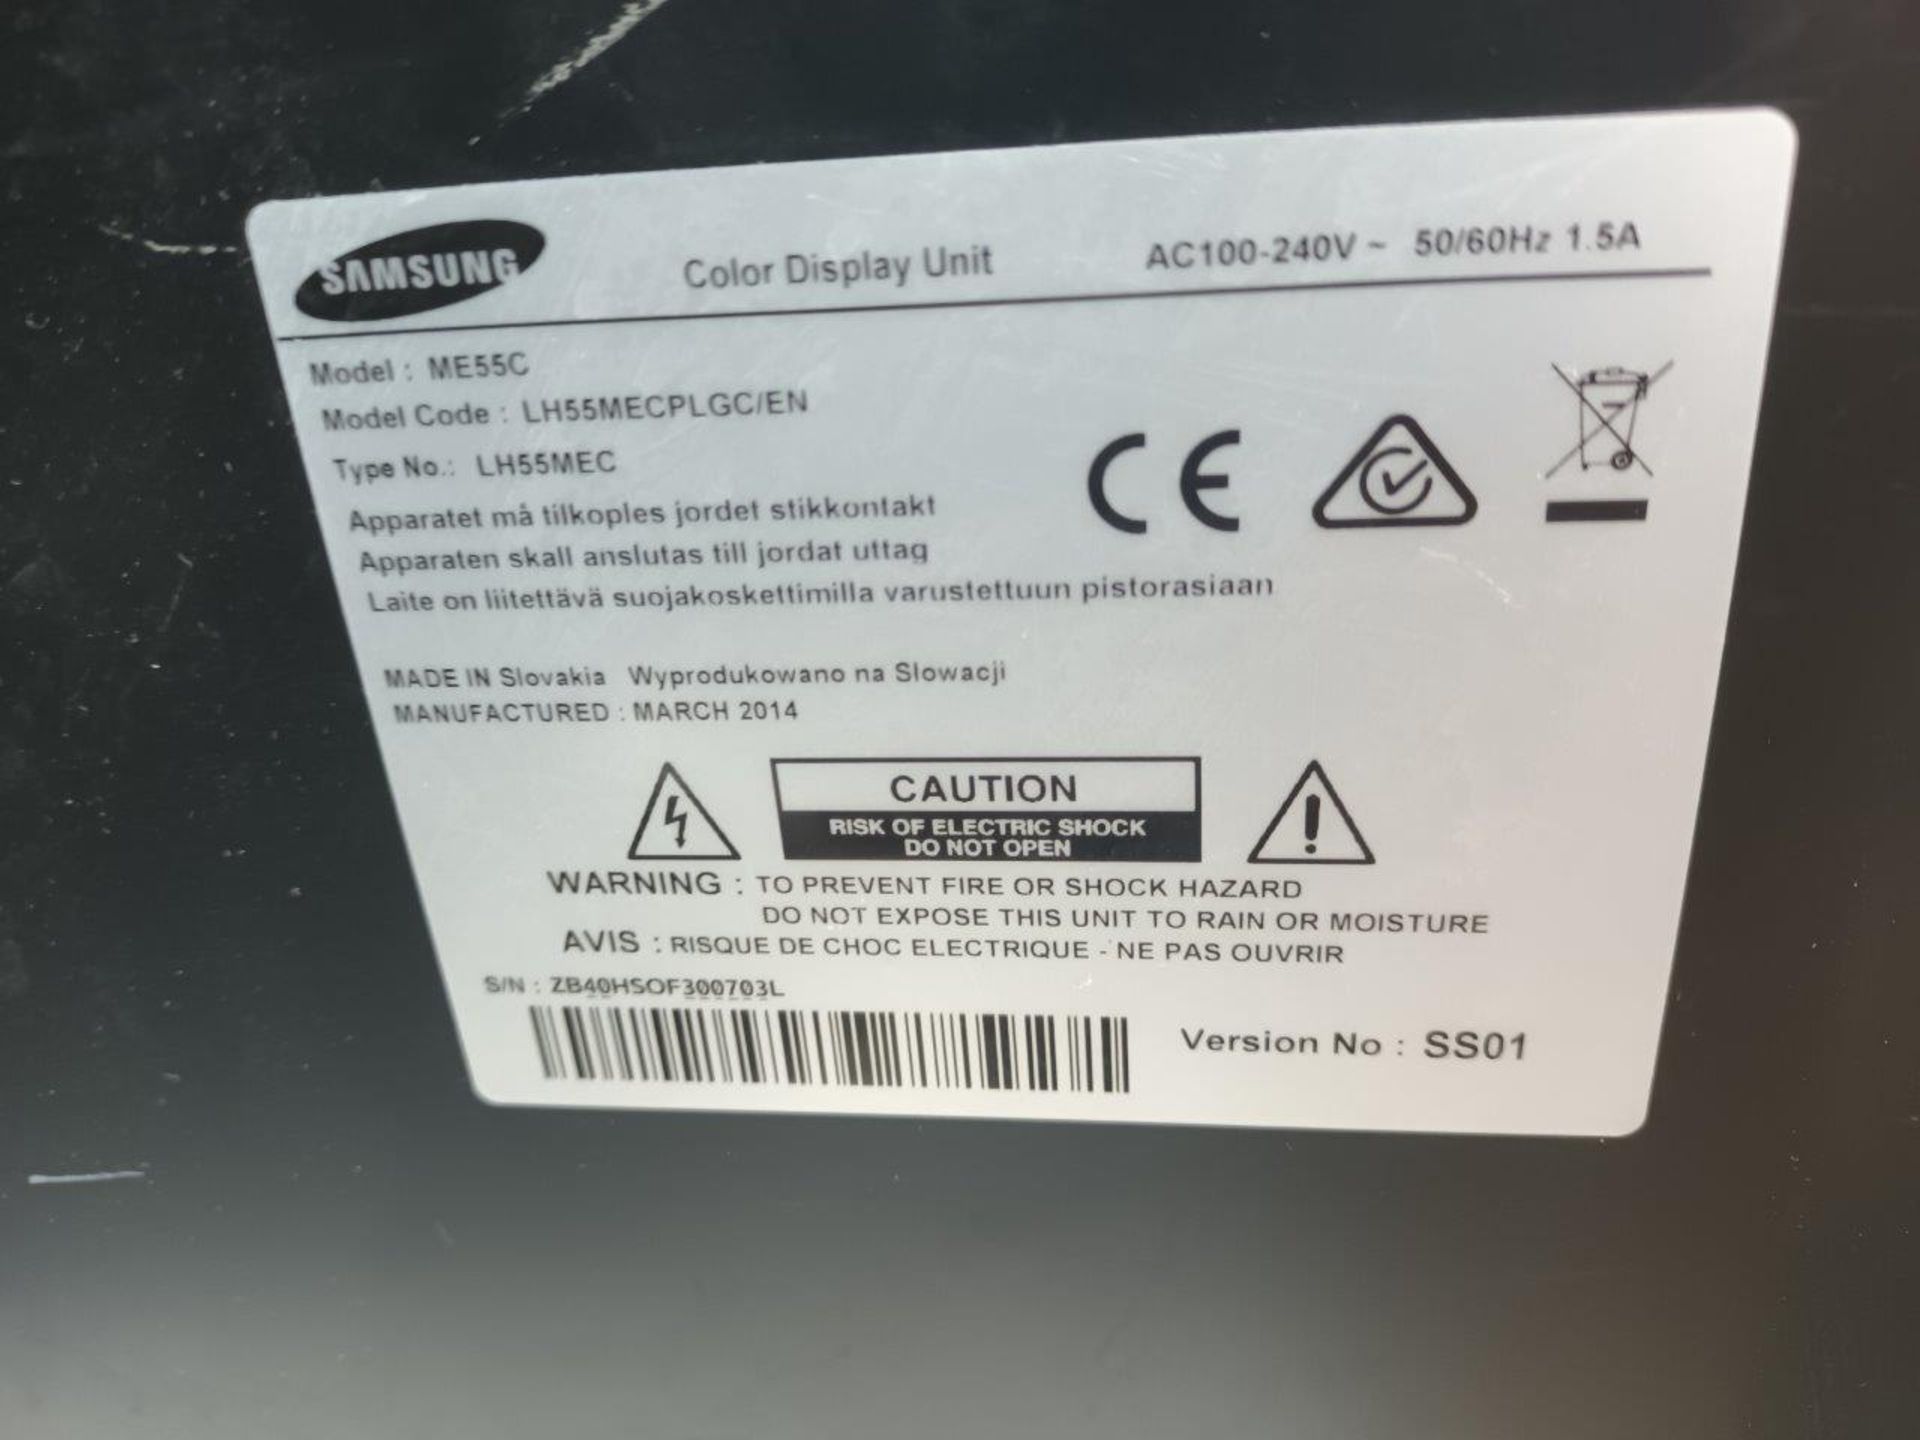 Samsung ME55C 55" colour display unit (no stand) - Image 2 of 3